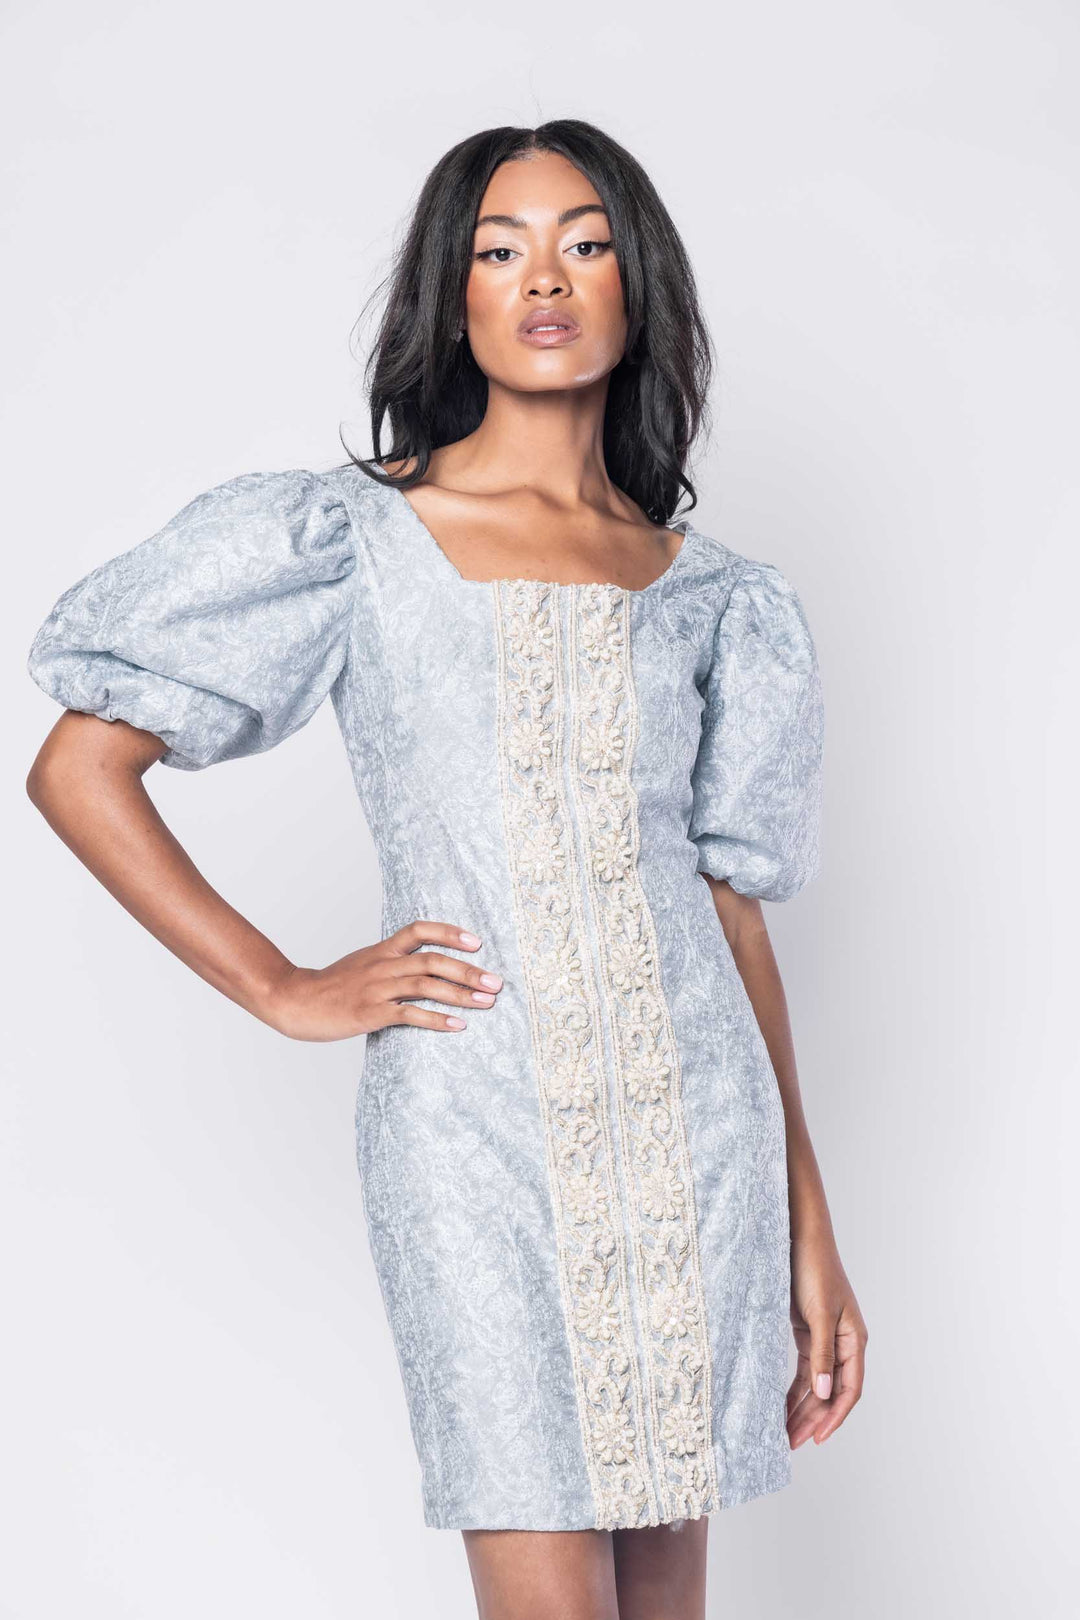 Beautiful model in a pale blue beaded ornate cocktail dress by Sujata Gazder - close view